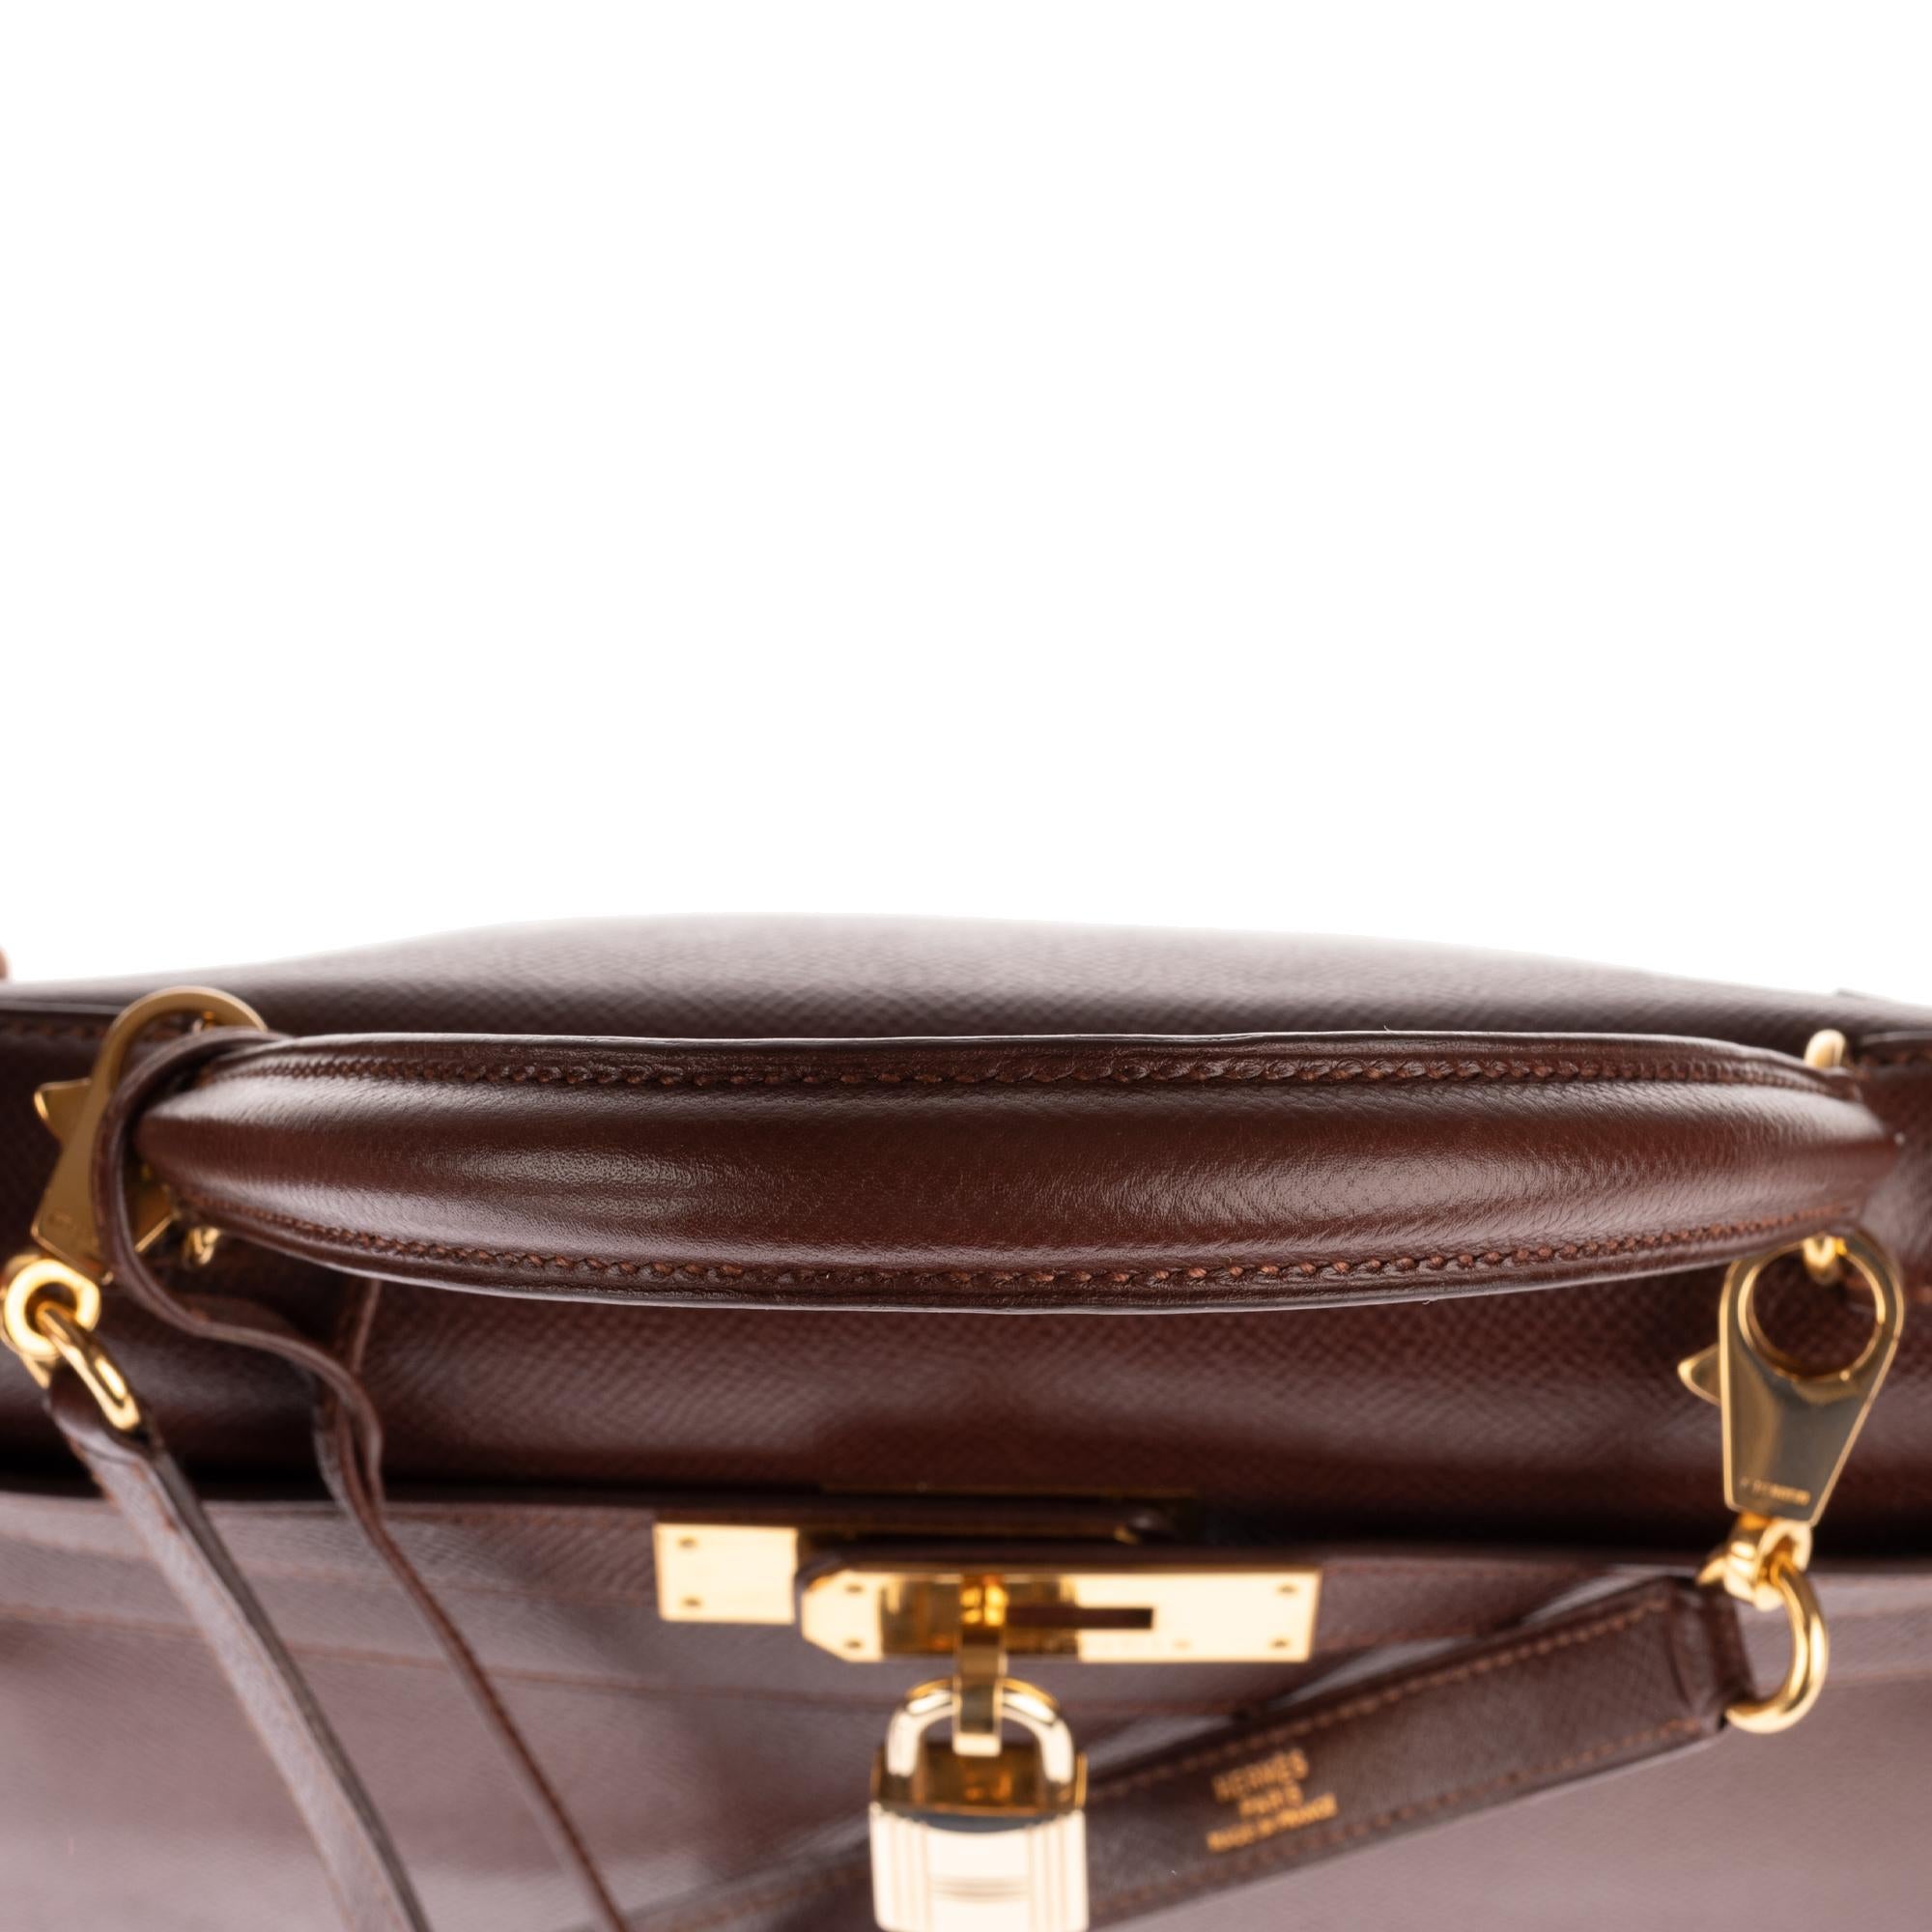 Hermès Kelly 28 handbag in Courchevel Brown leather with strap, gold hardware ! 1